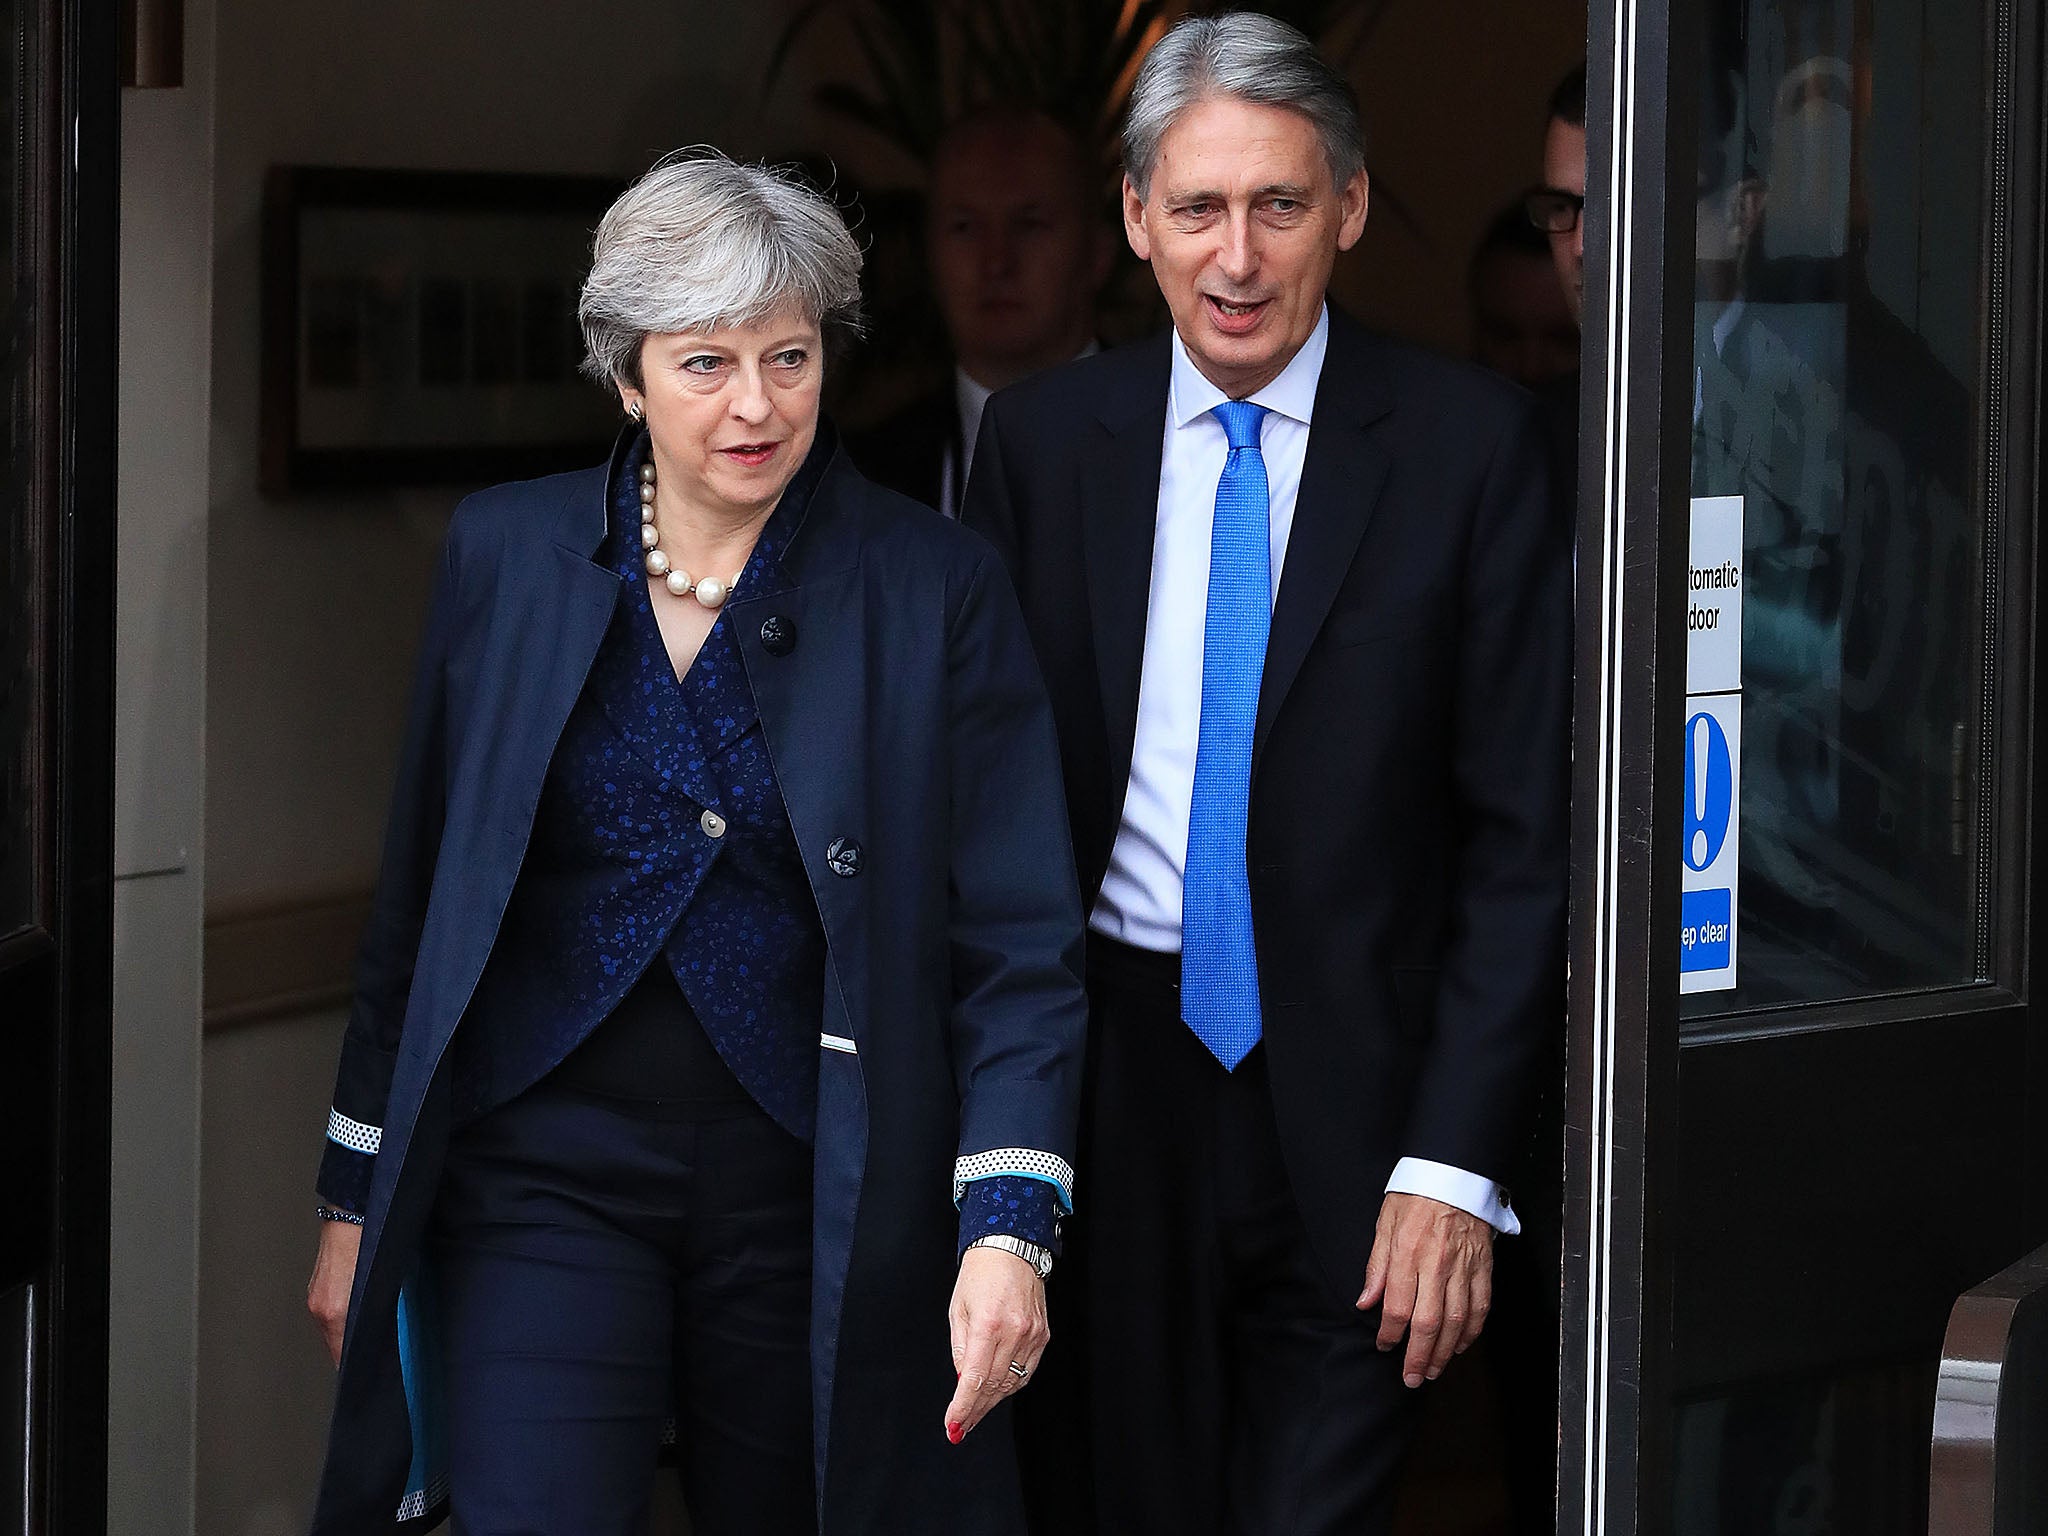 The Prime Minister reportedly intended to sack her Chancellor, but lacked the authority after losing her majority at the election